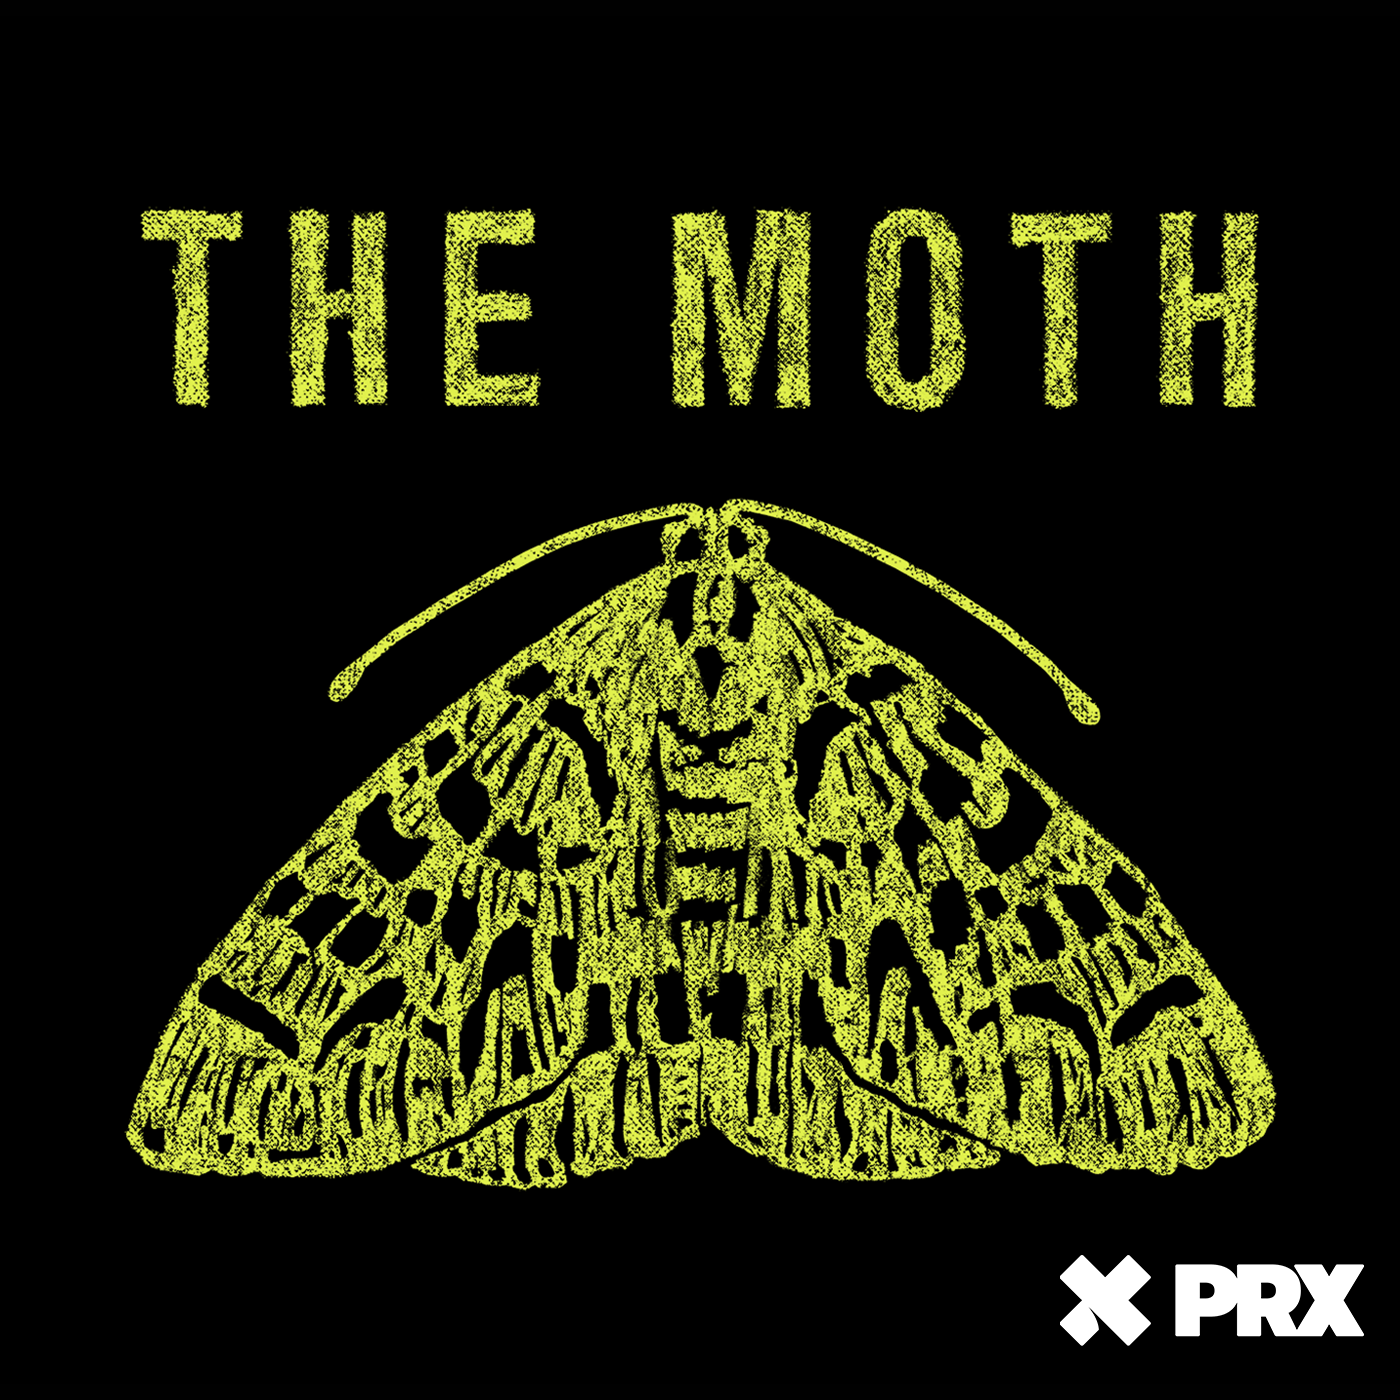 The Moth Radio Hour: Changes of Heart